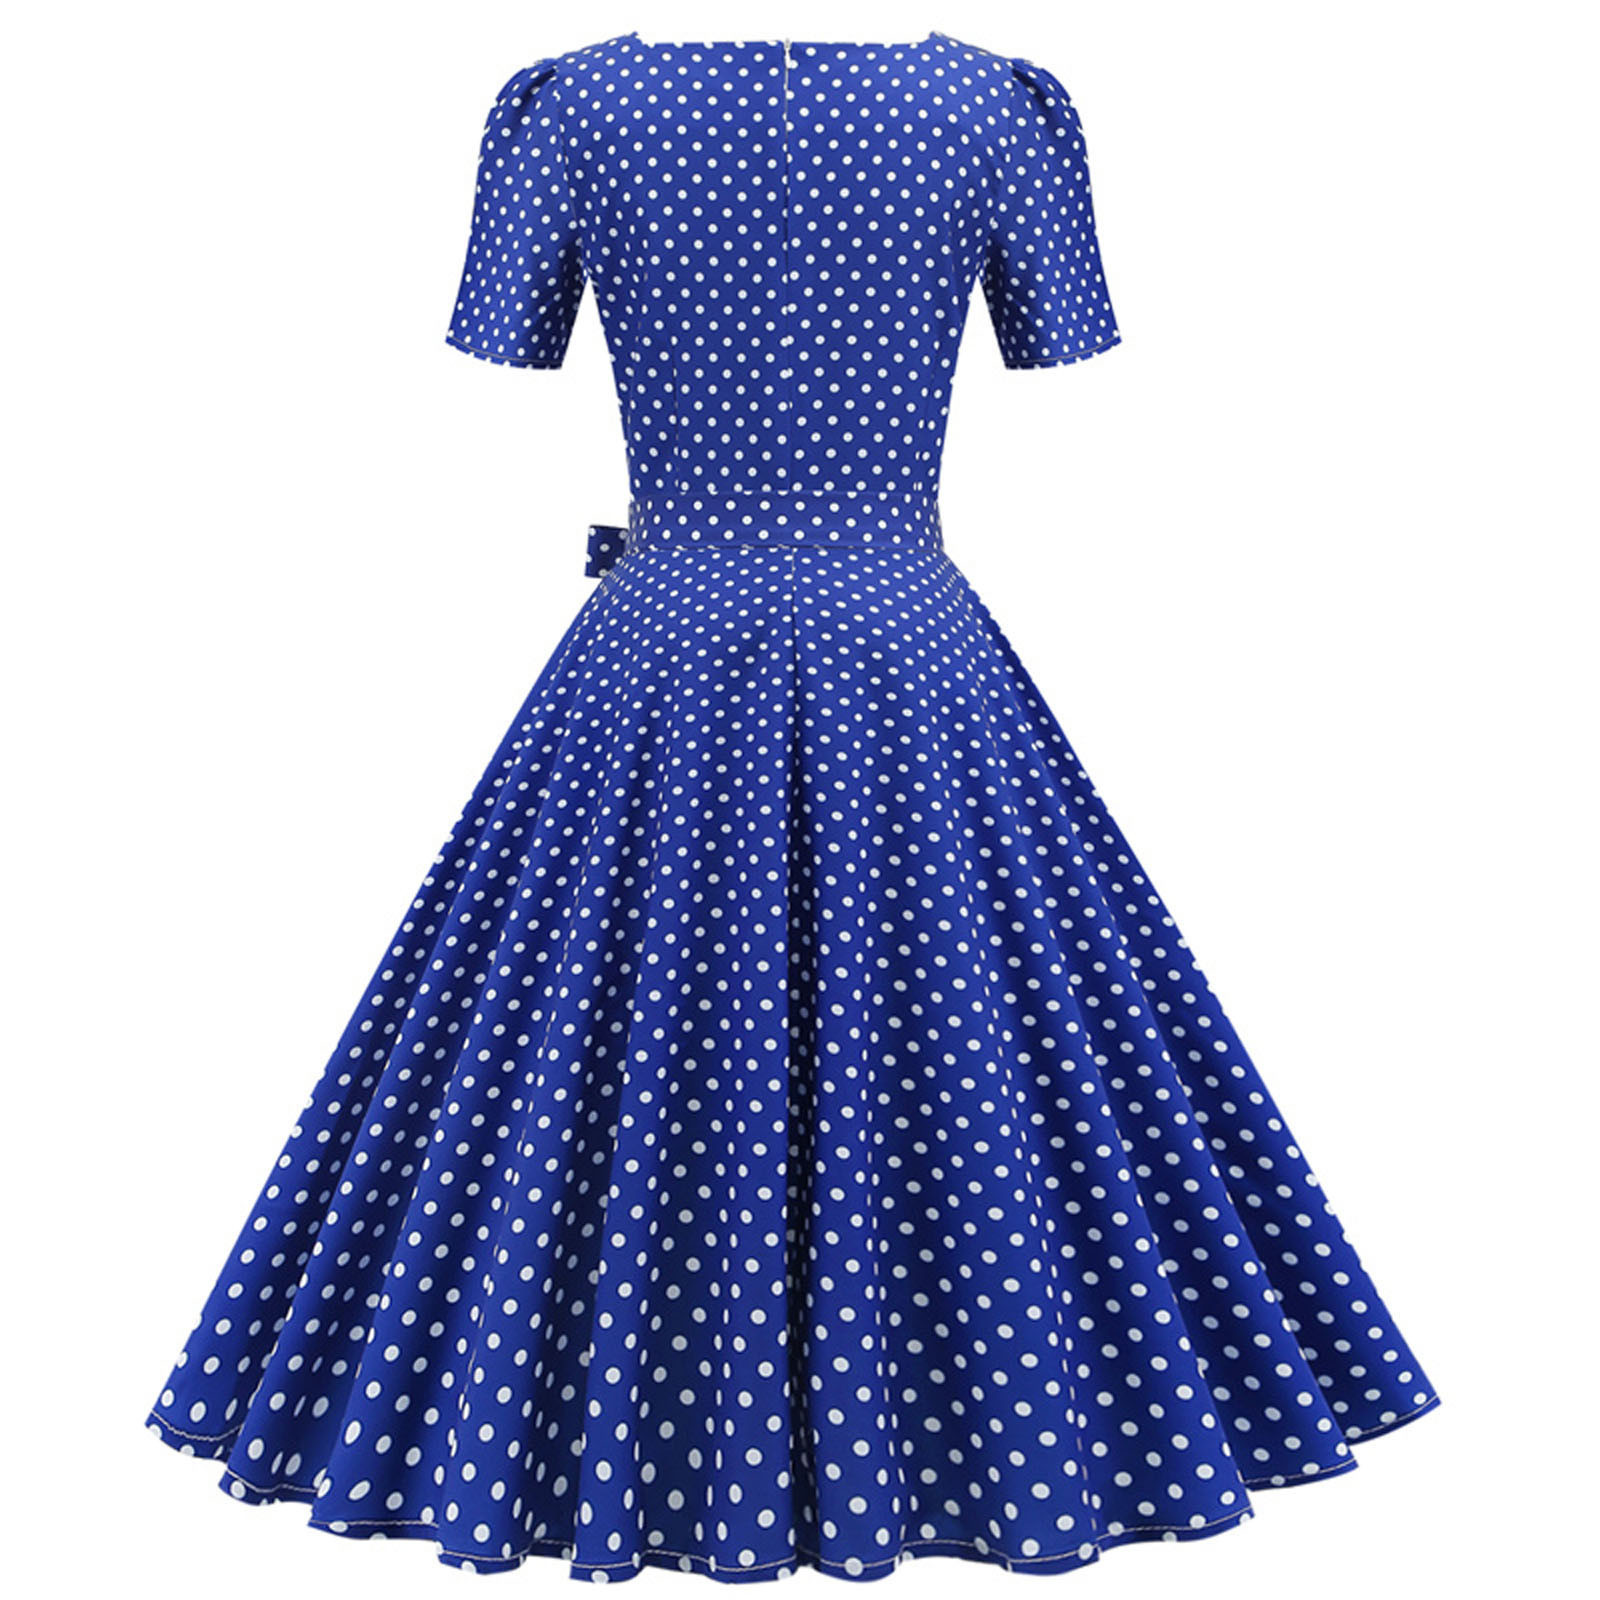 Womens Polka Dot Dress 1950s Vintage Rockabilly Flowy Dresses Short Sleeve Cocktail Prom Party Dress for Women 2023 - image 3 of 4